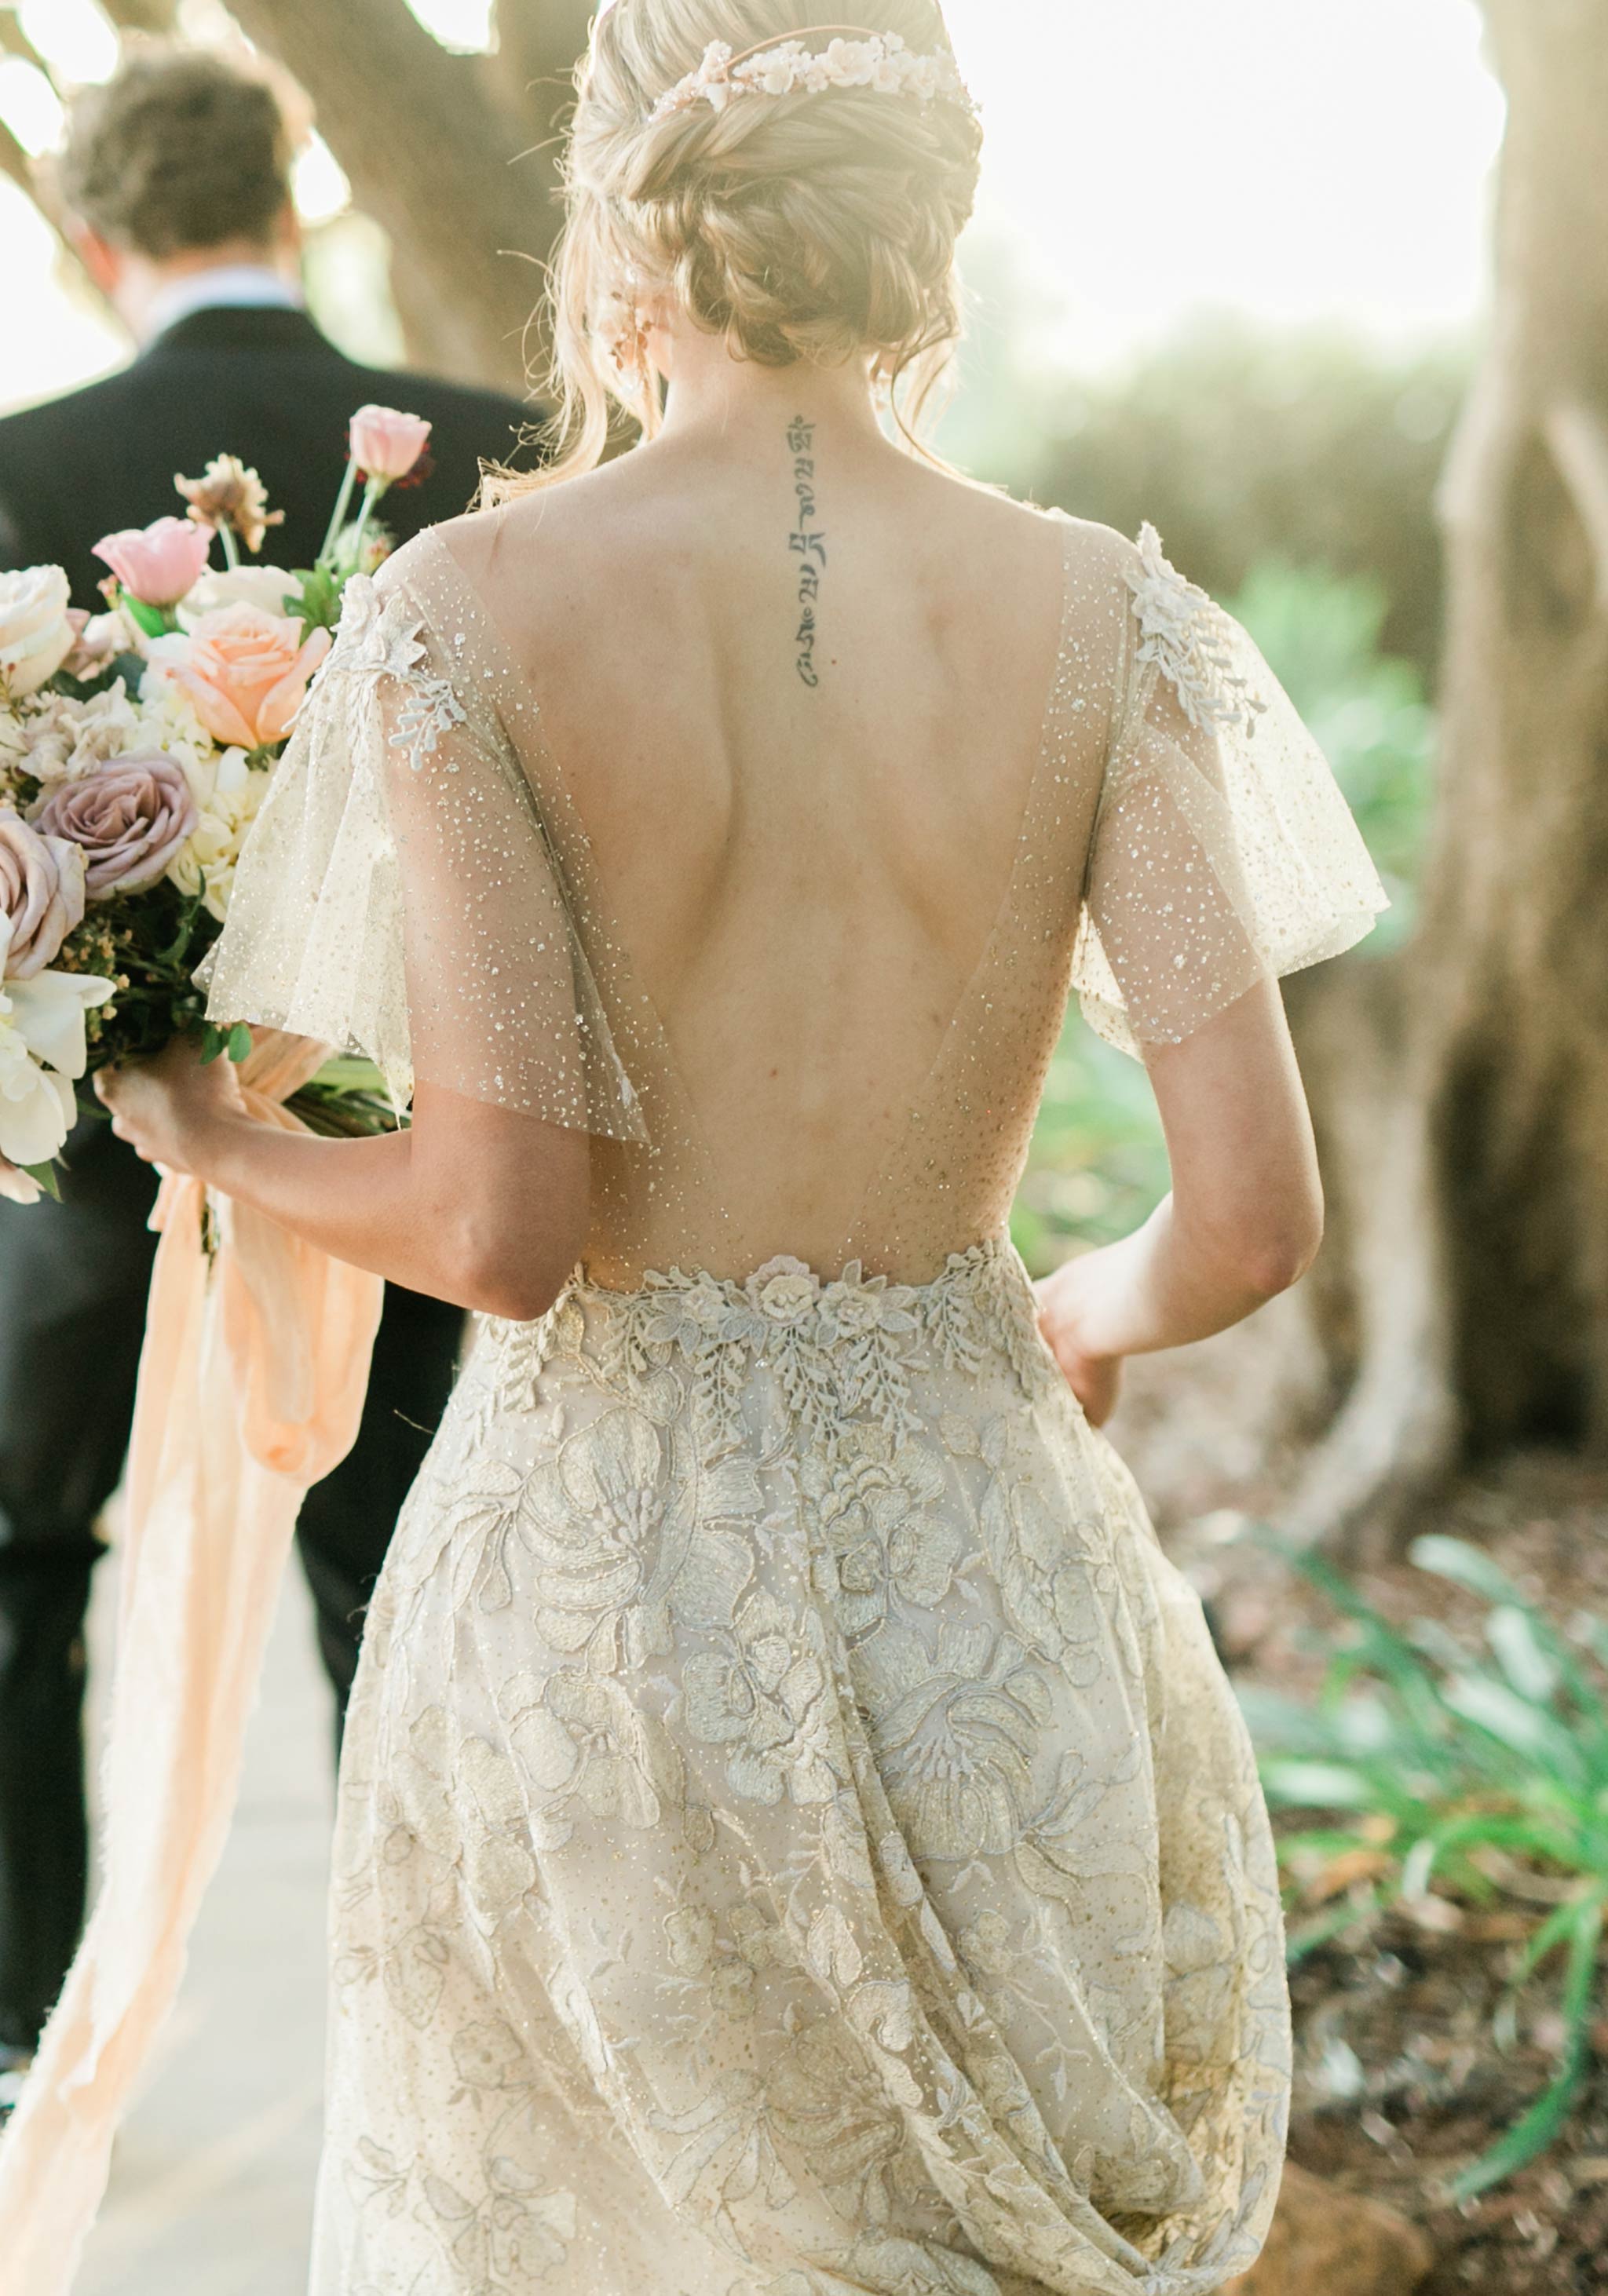 15 Beautiful Backless Wedding Dresses & Gowns You Need to See!